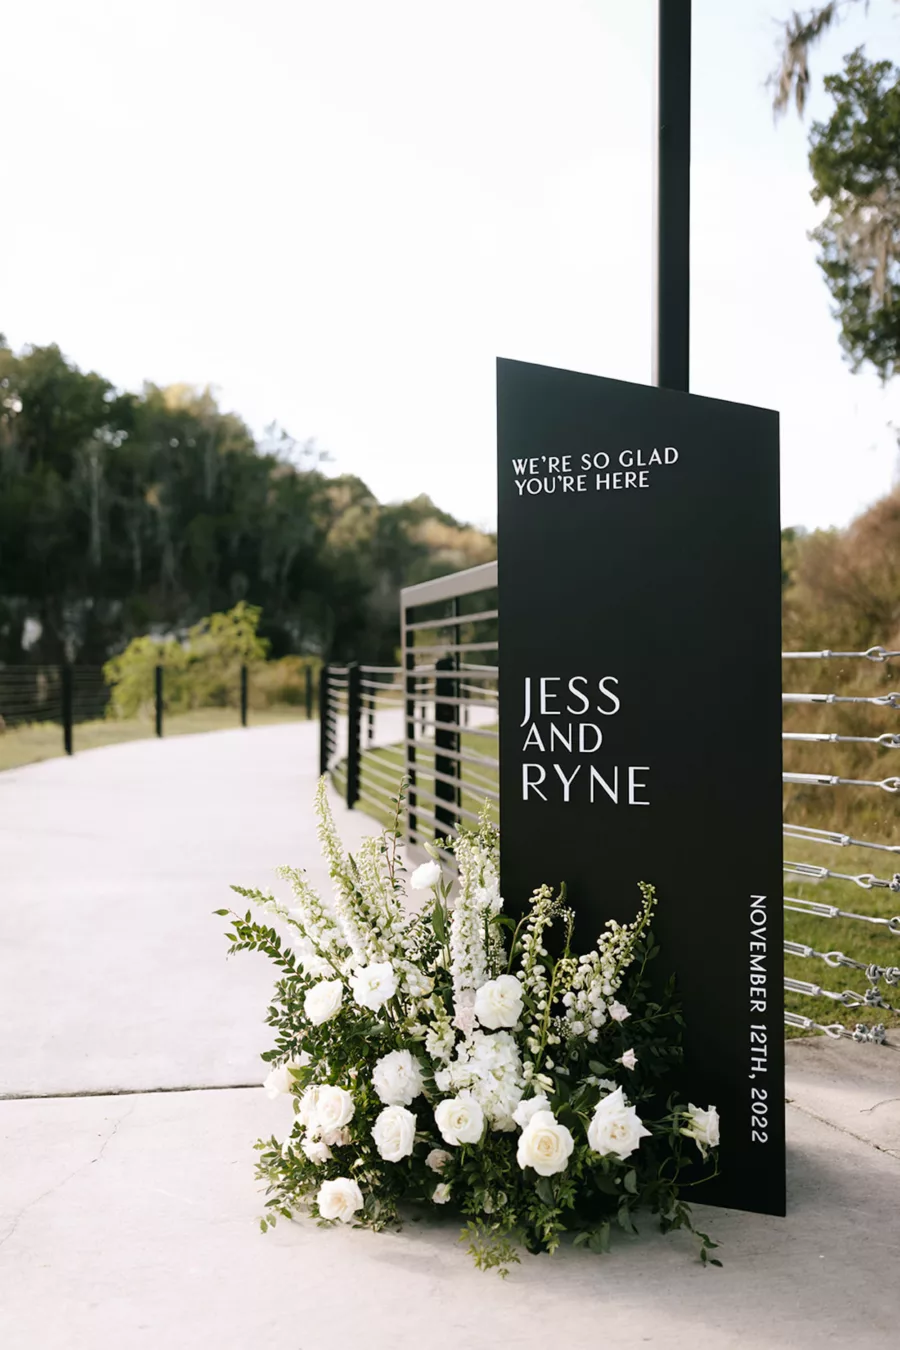 Modern Black and White Welcome Wedding Ceremony Sign Ideas | White Snapdragons, Roses, and Greenery Floral Arrangement Decor Inspiration